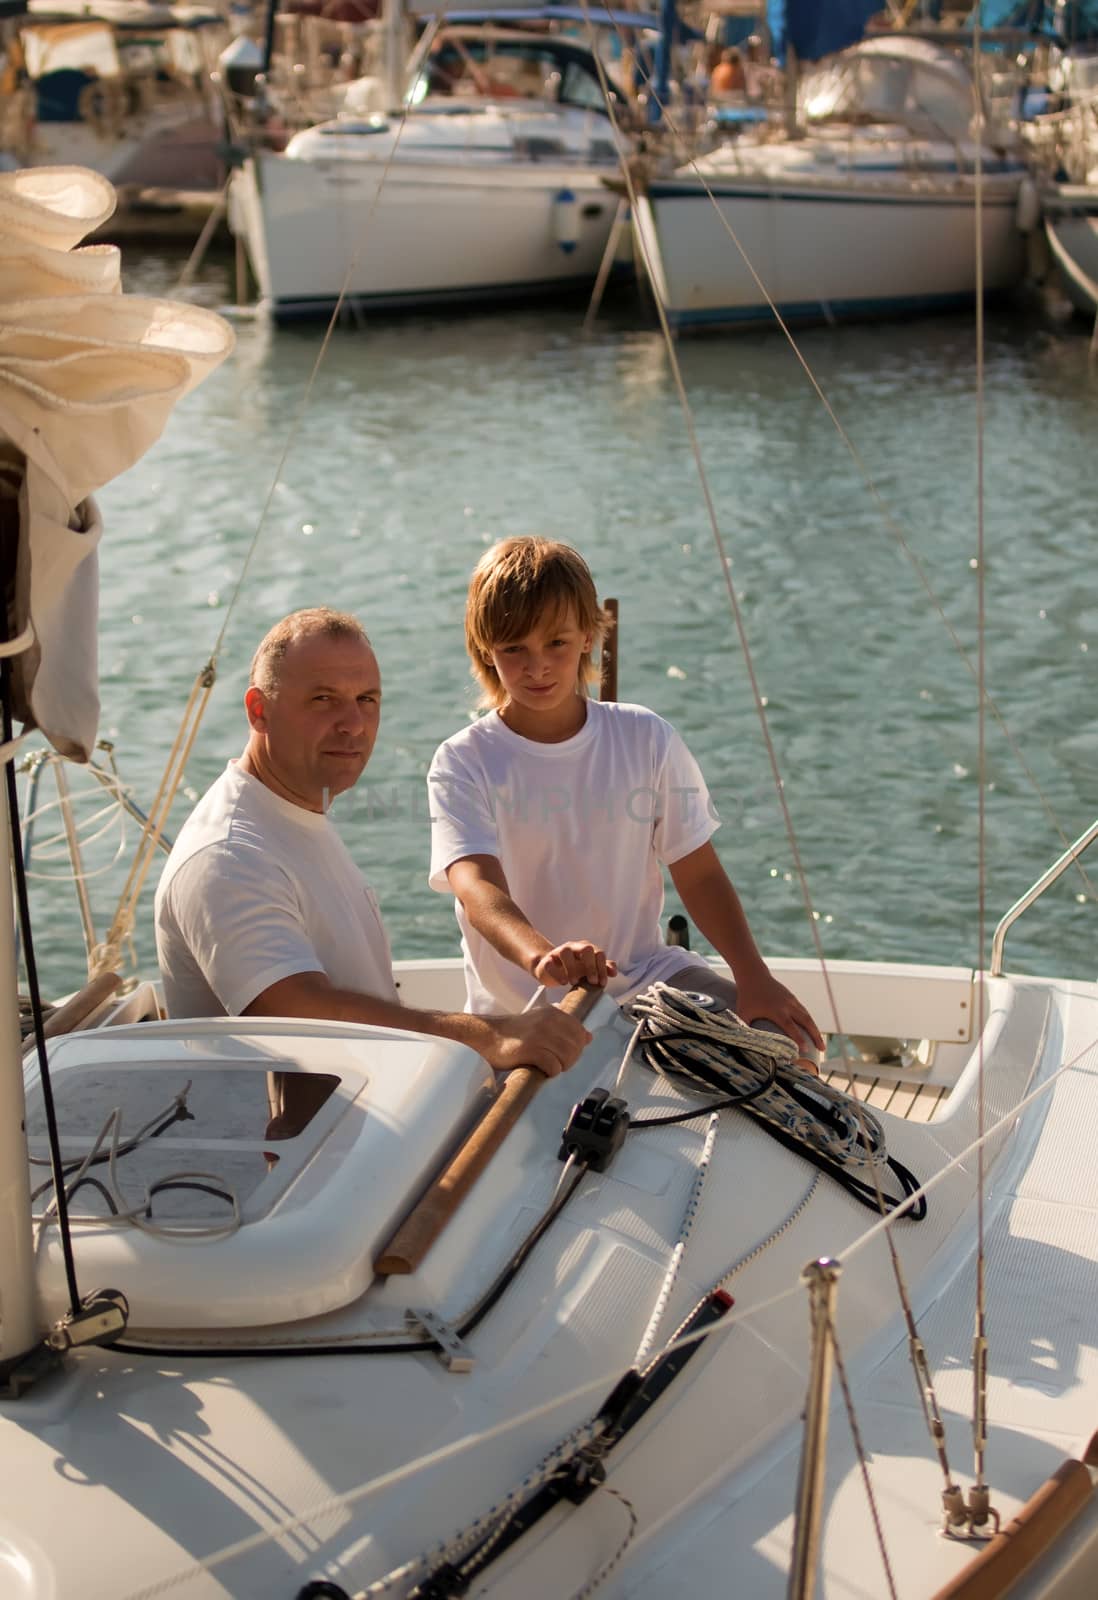 Father and son enjoying summer day on a yacht.